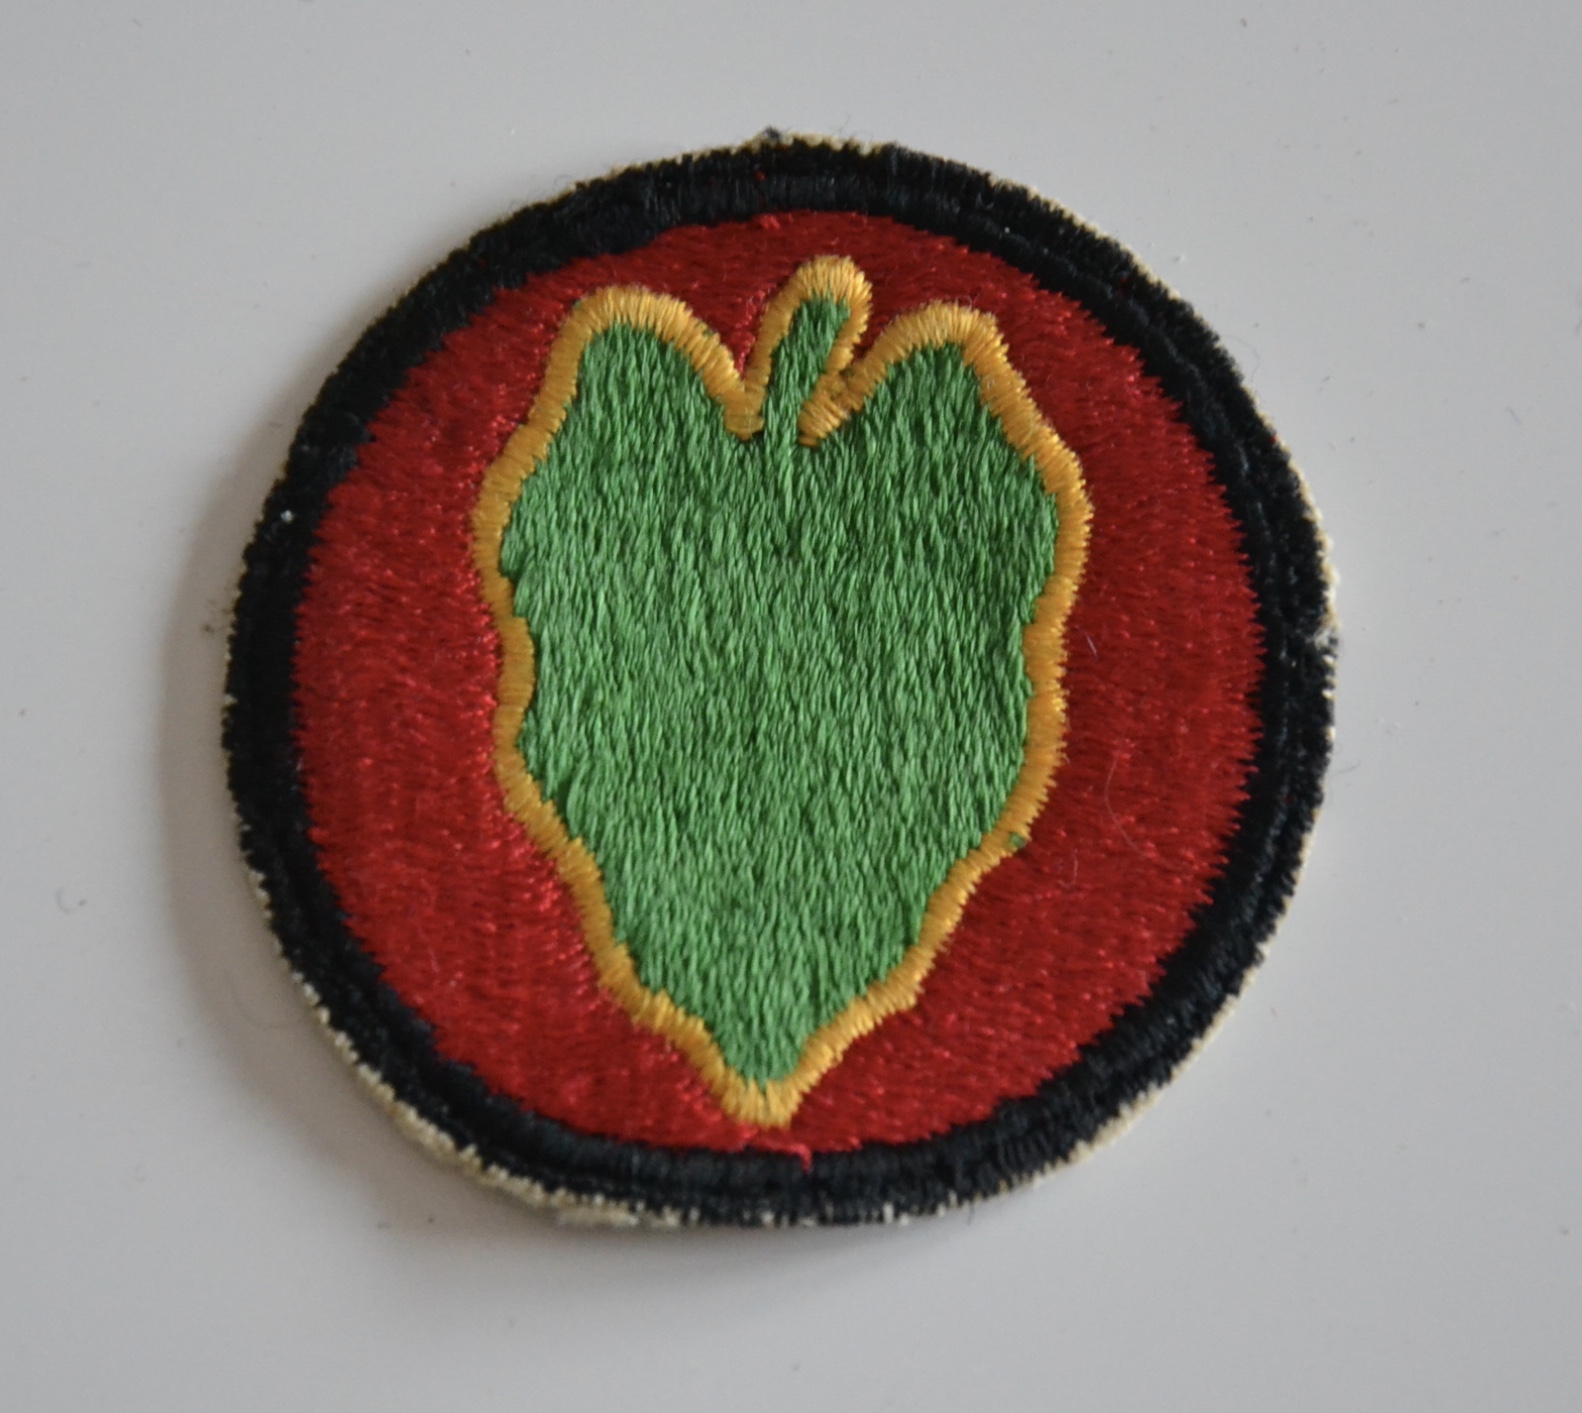 militaria : PATCH US 24TH  DIVISION VICTORY